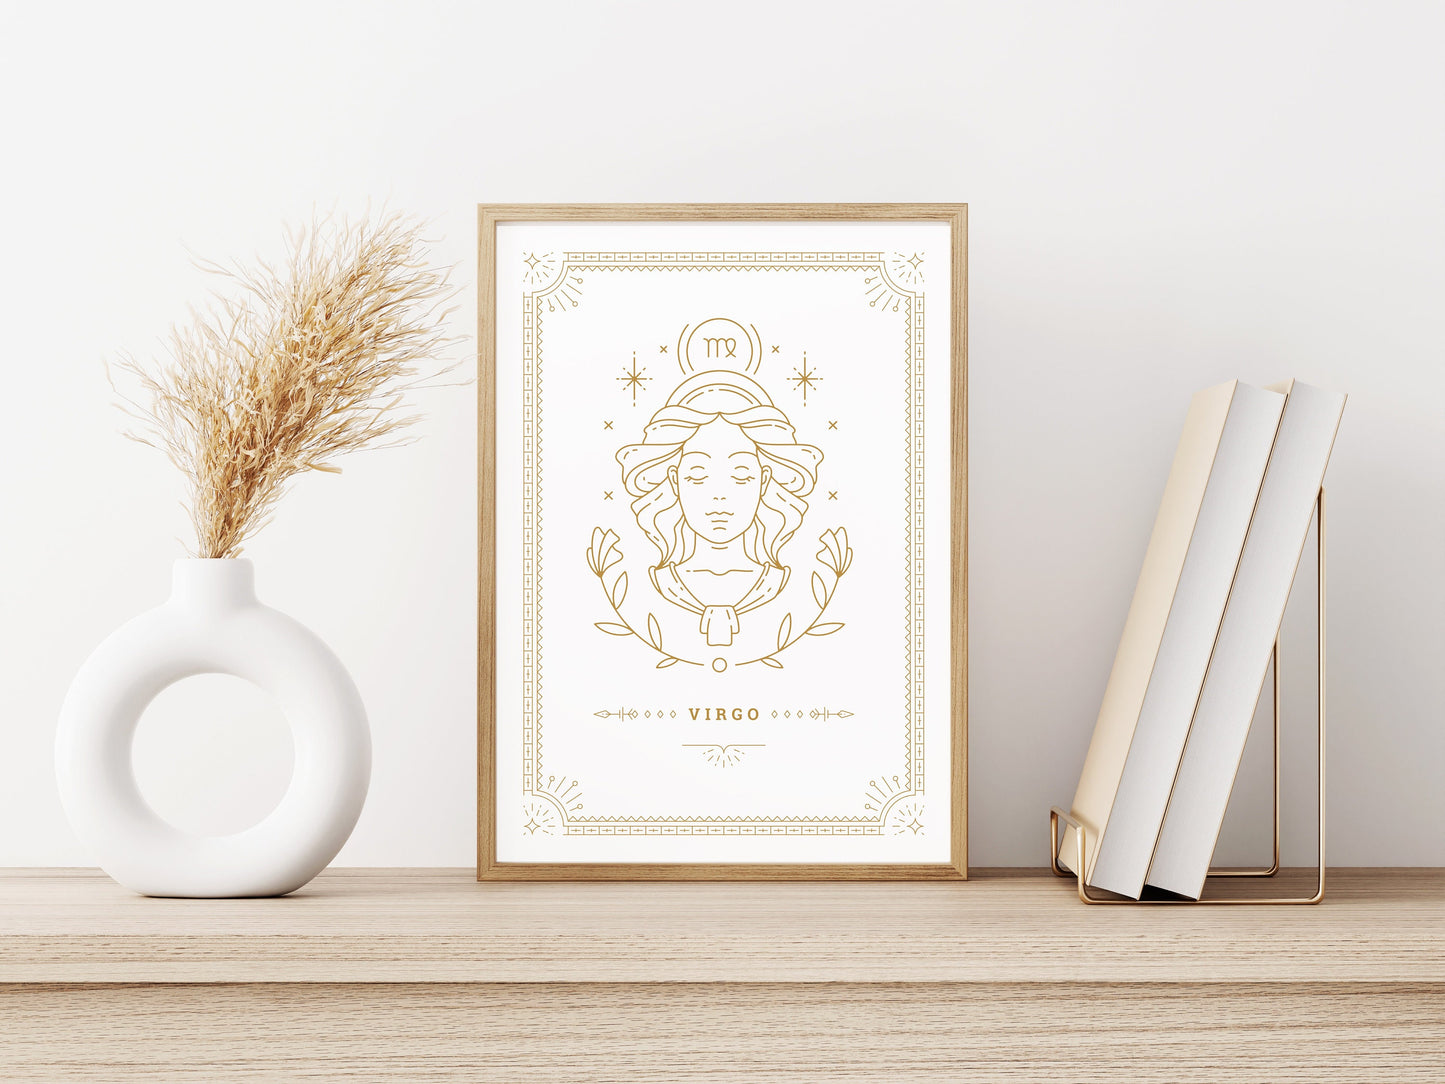 Virgo Tarot Card Poster ⎜ Your Star Sign personalised gift